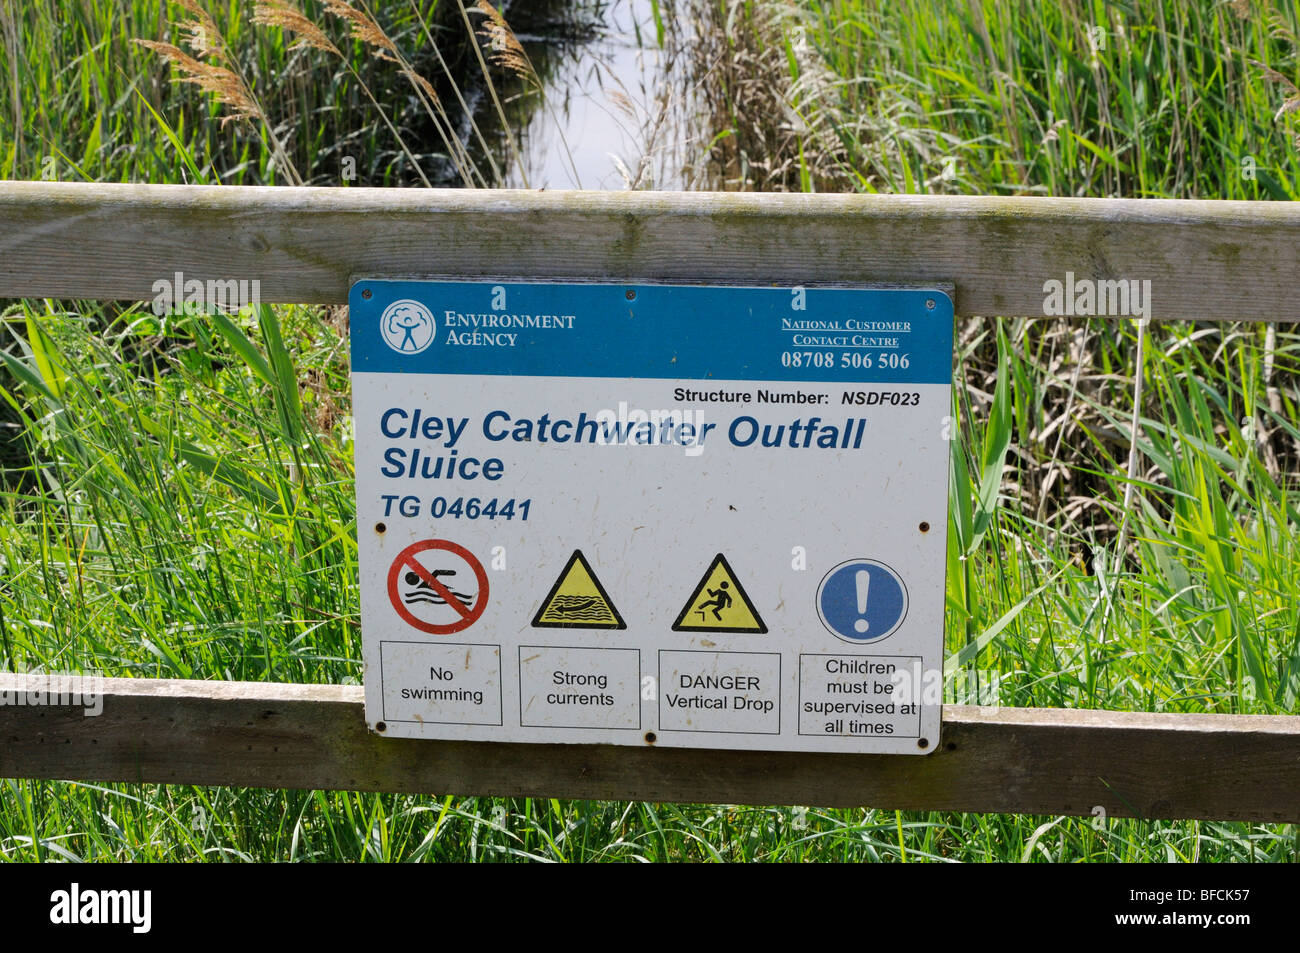 Cley Catchwater Outfall Sluice notice, Cley next the Sea, Norfolk, England, UK. Stock Photo